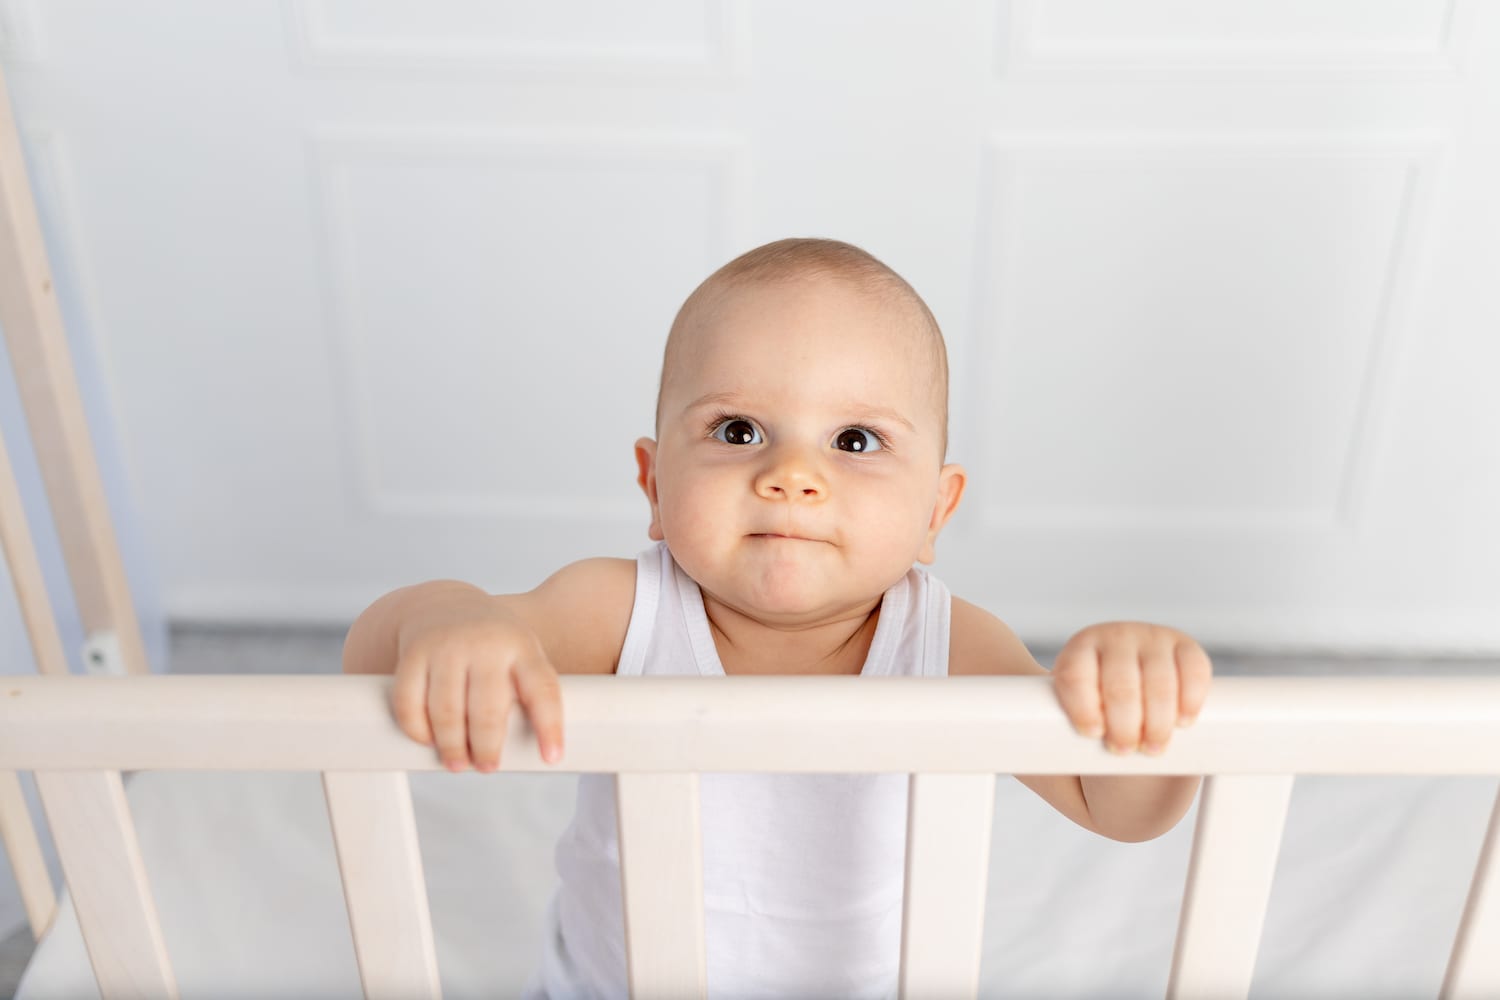 portrait of a smiling baby boy 8 months old standing in a crib